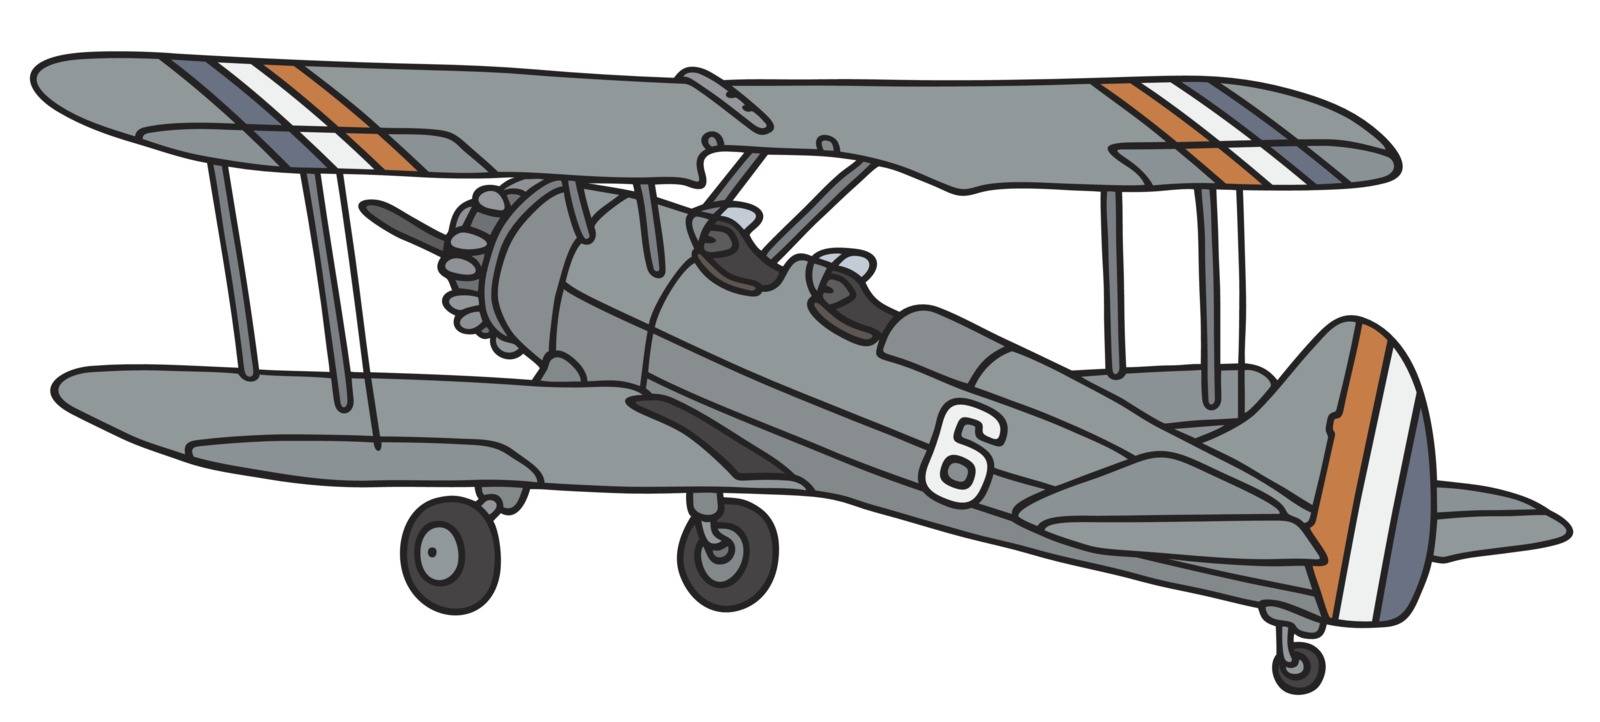 Hand drawing of a vintage biplane - not a real model